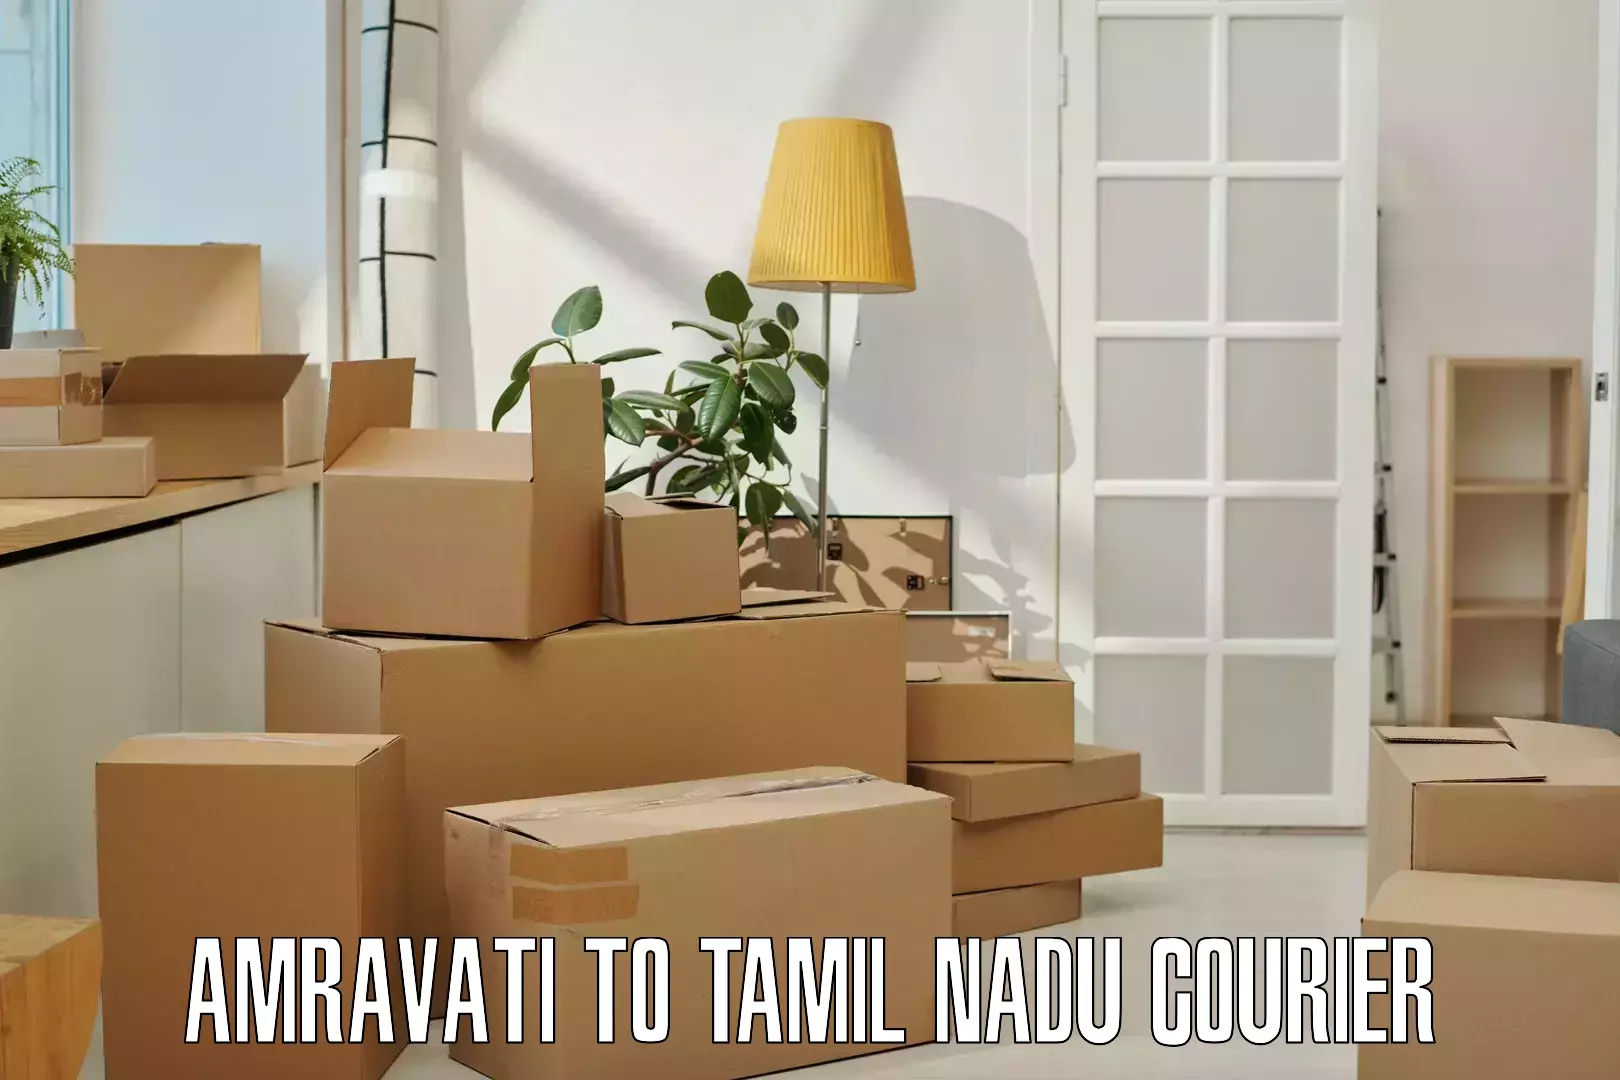 User-friendly delivery service Amravati to Tiruppur